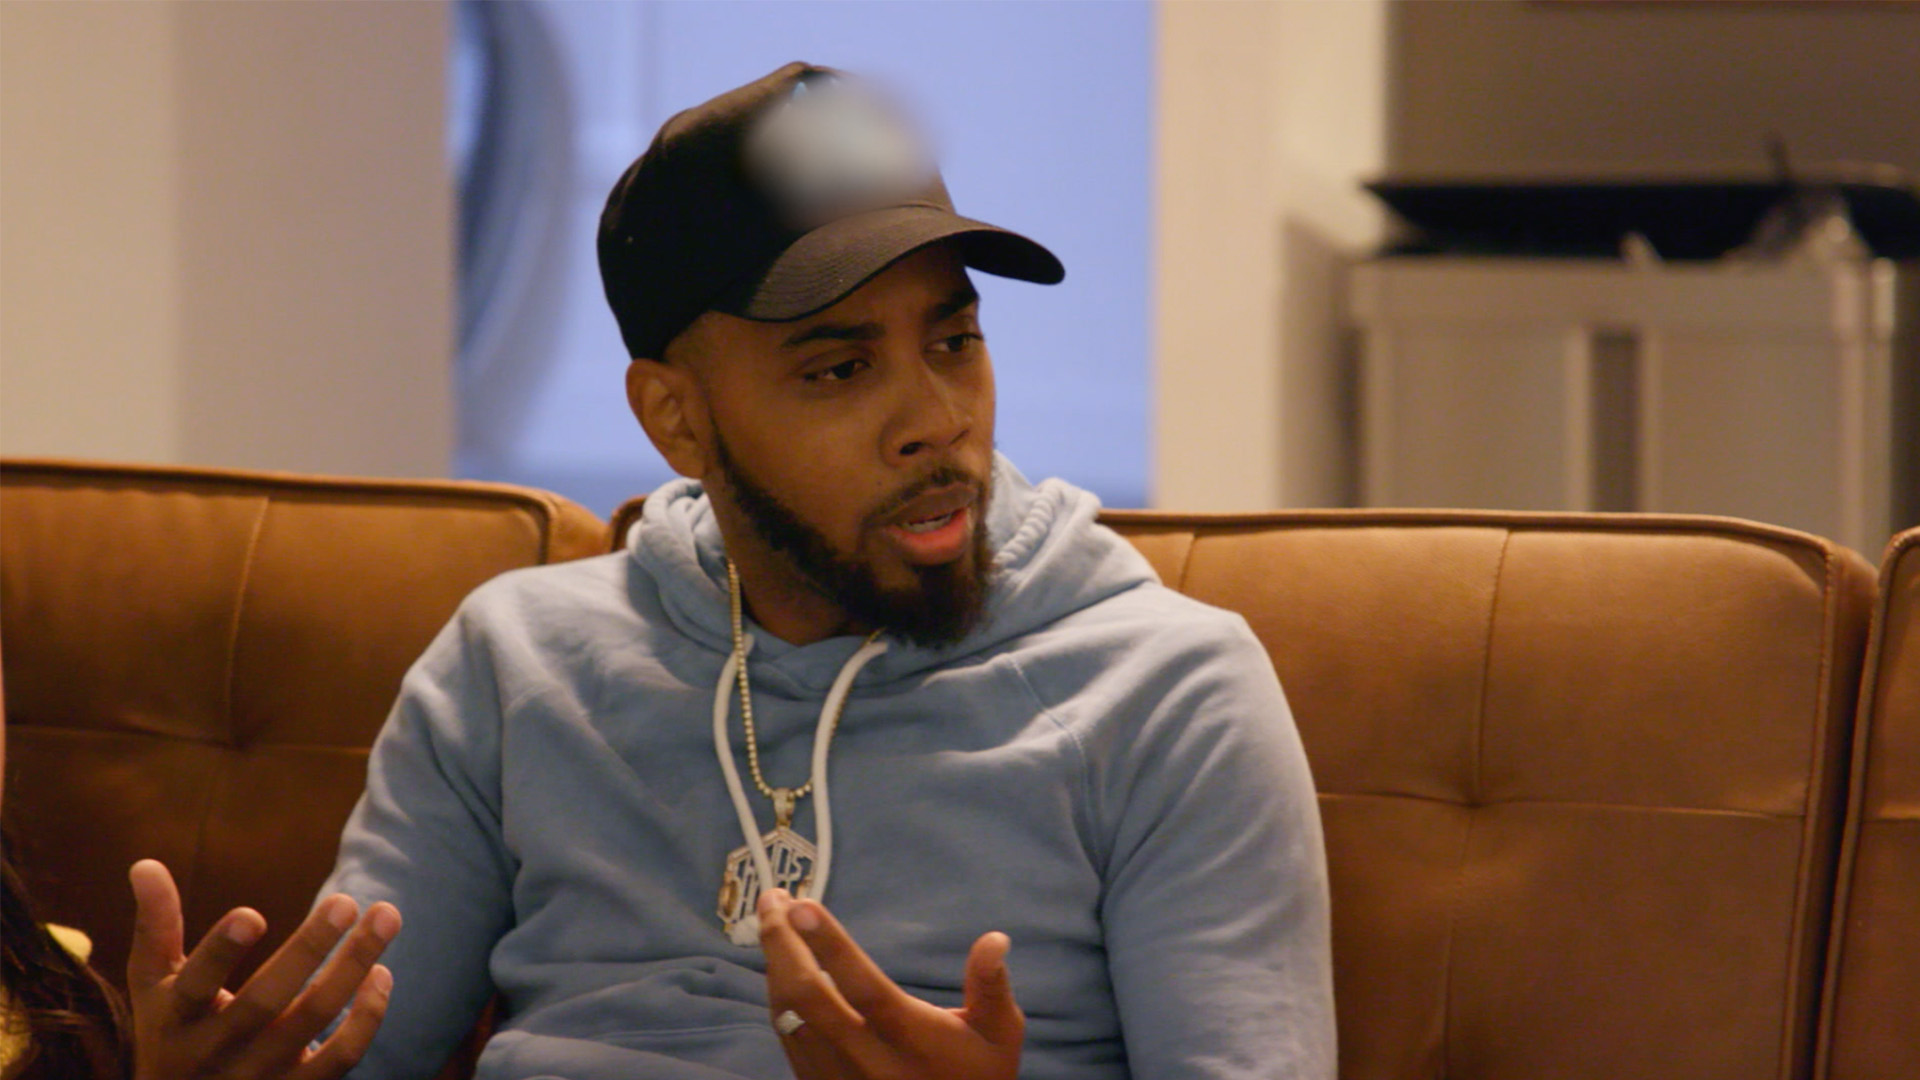 Watch Jojo Briefs Twist on His Run-in With Sam | Growing Up Hip Hop Video Extras